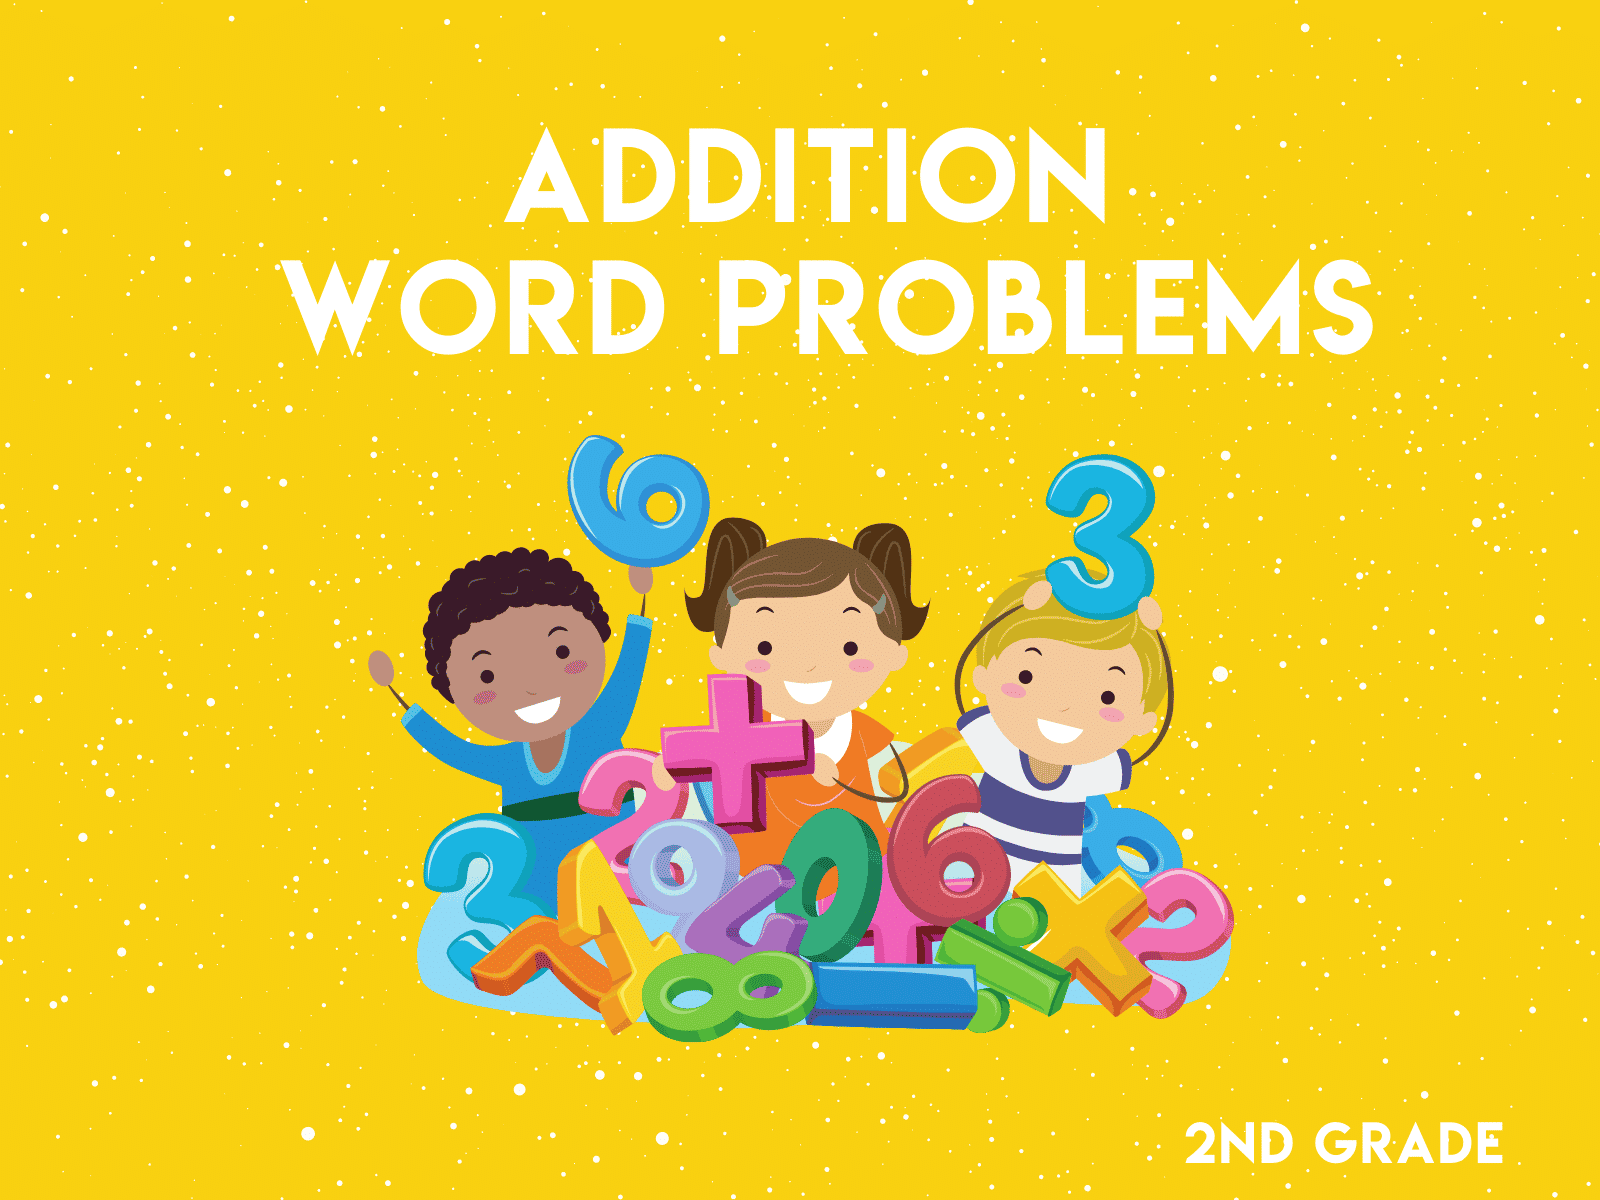 Free addition word problem worksheet for second grade math.